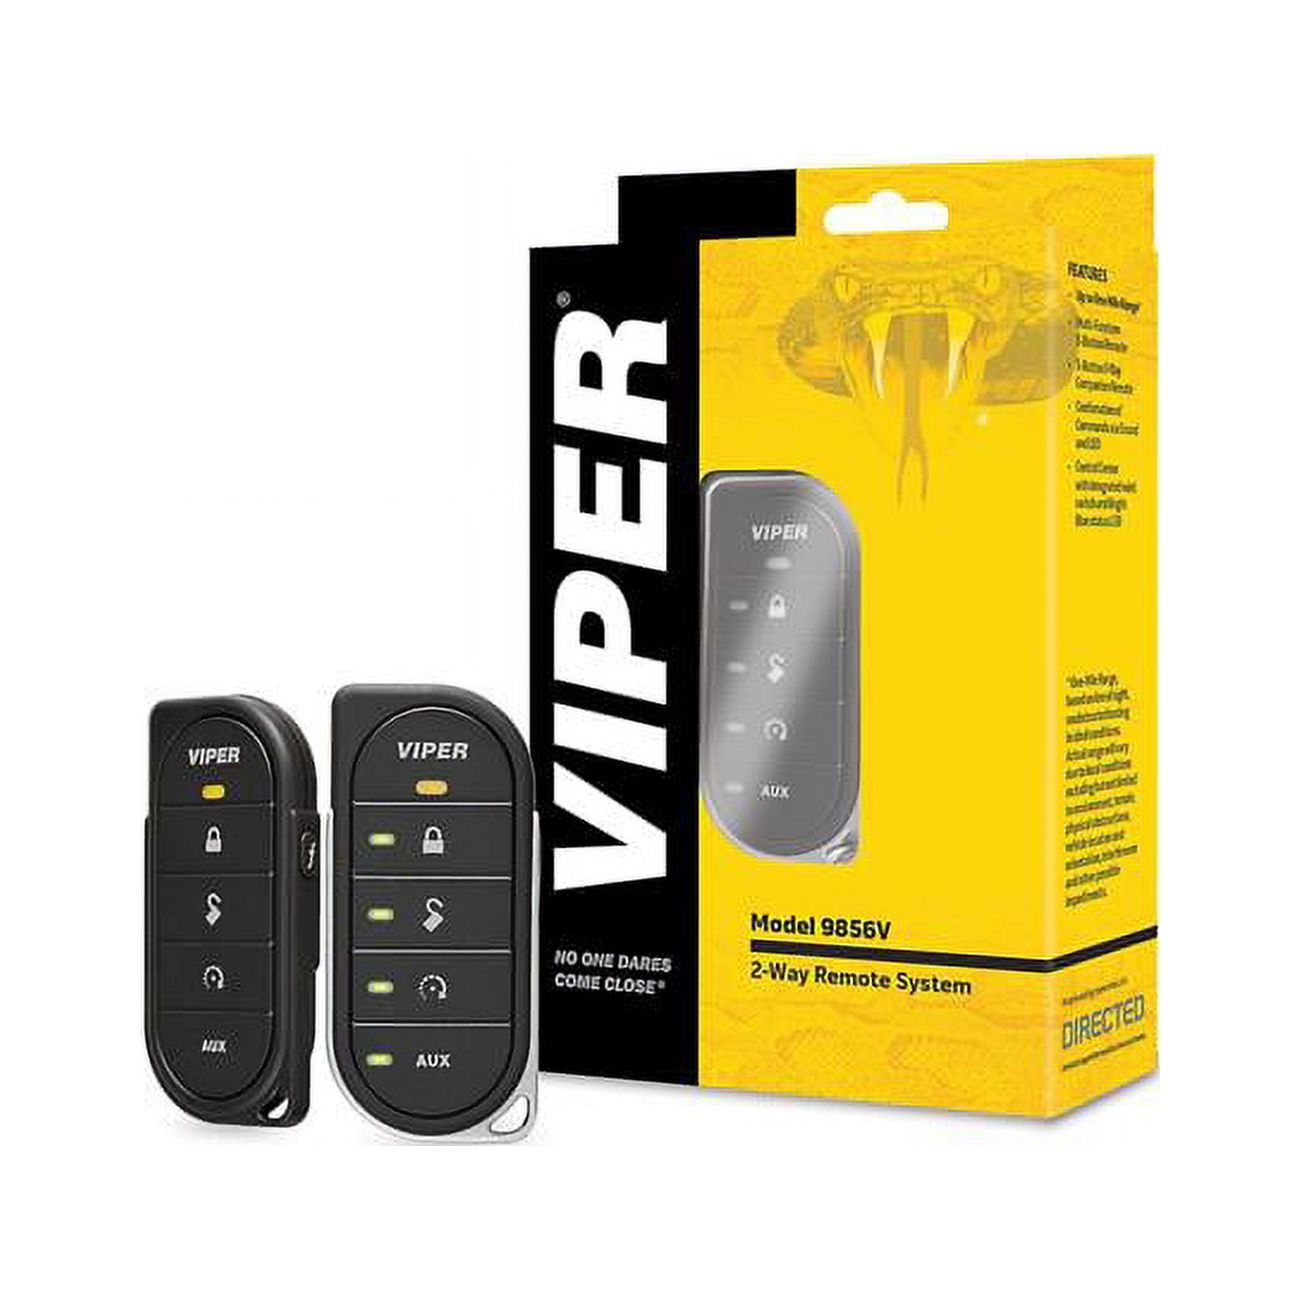 Directed Electronics 9856V 2 Way Remote Control 1-Mile Range for Directed Car Start Systems - Black - image 1 of 2